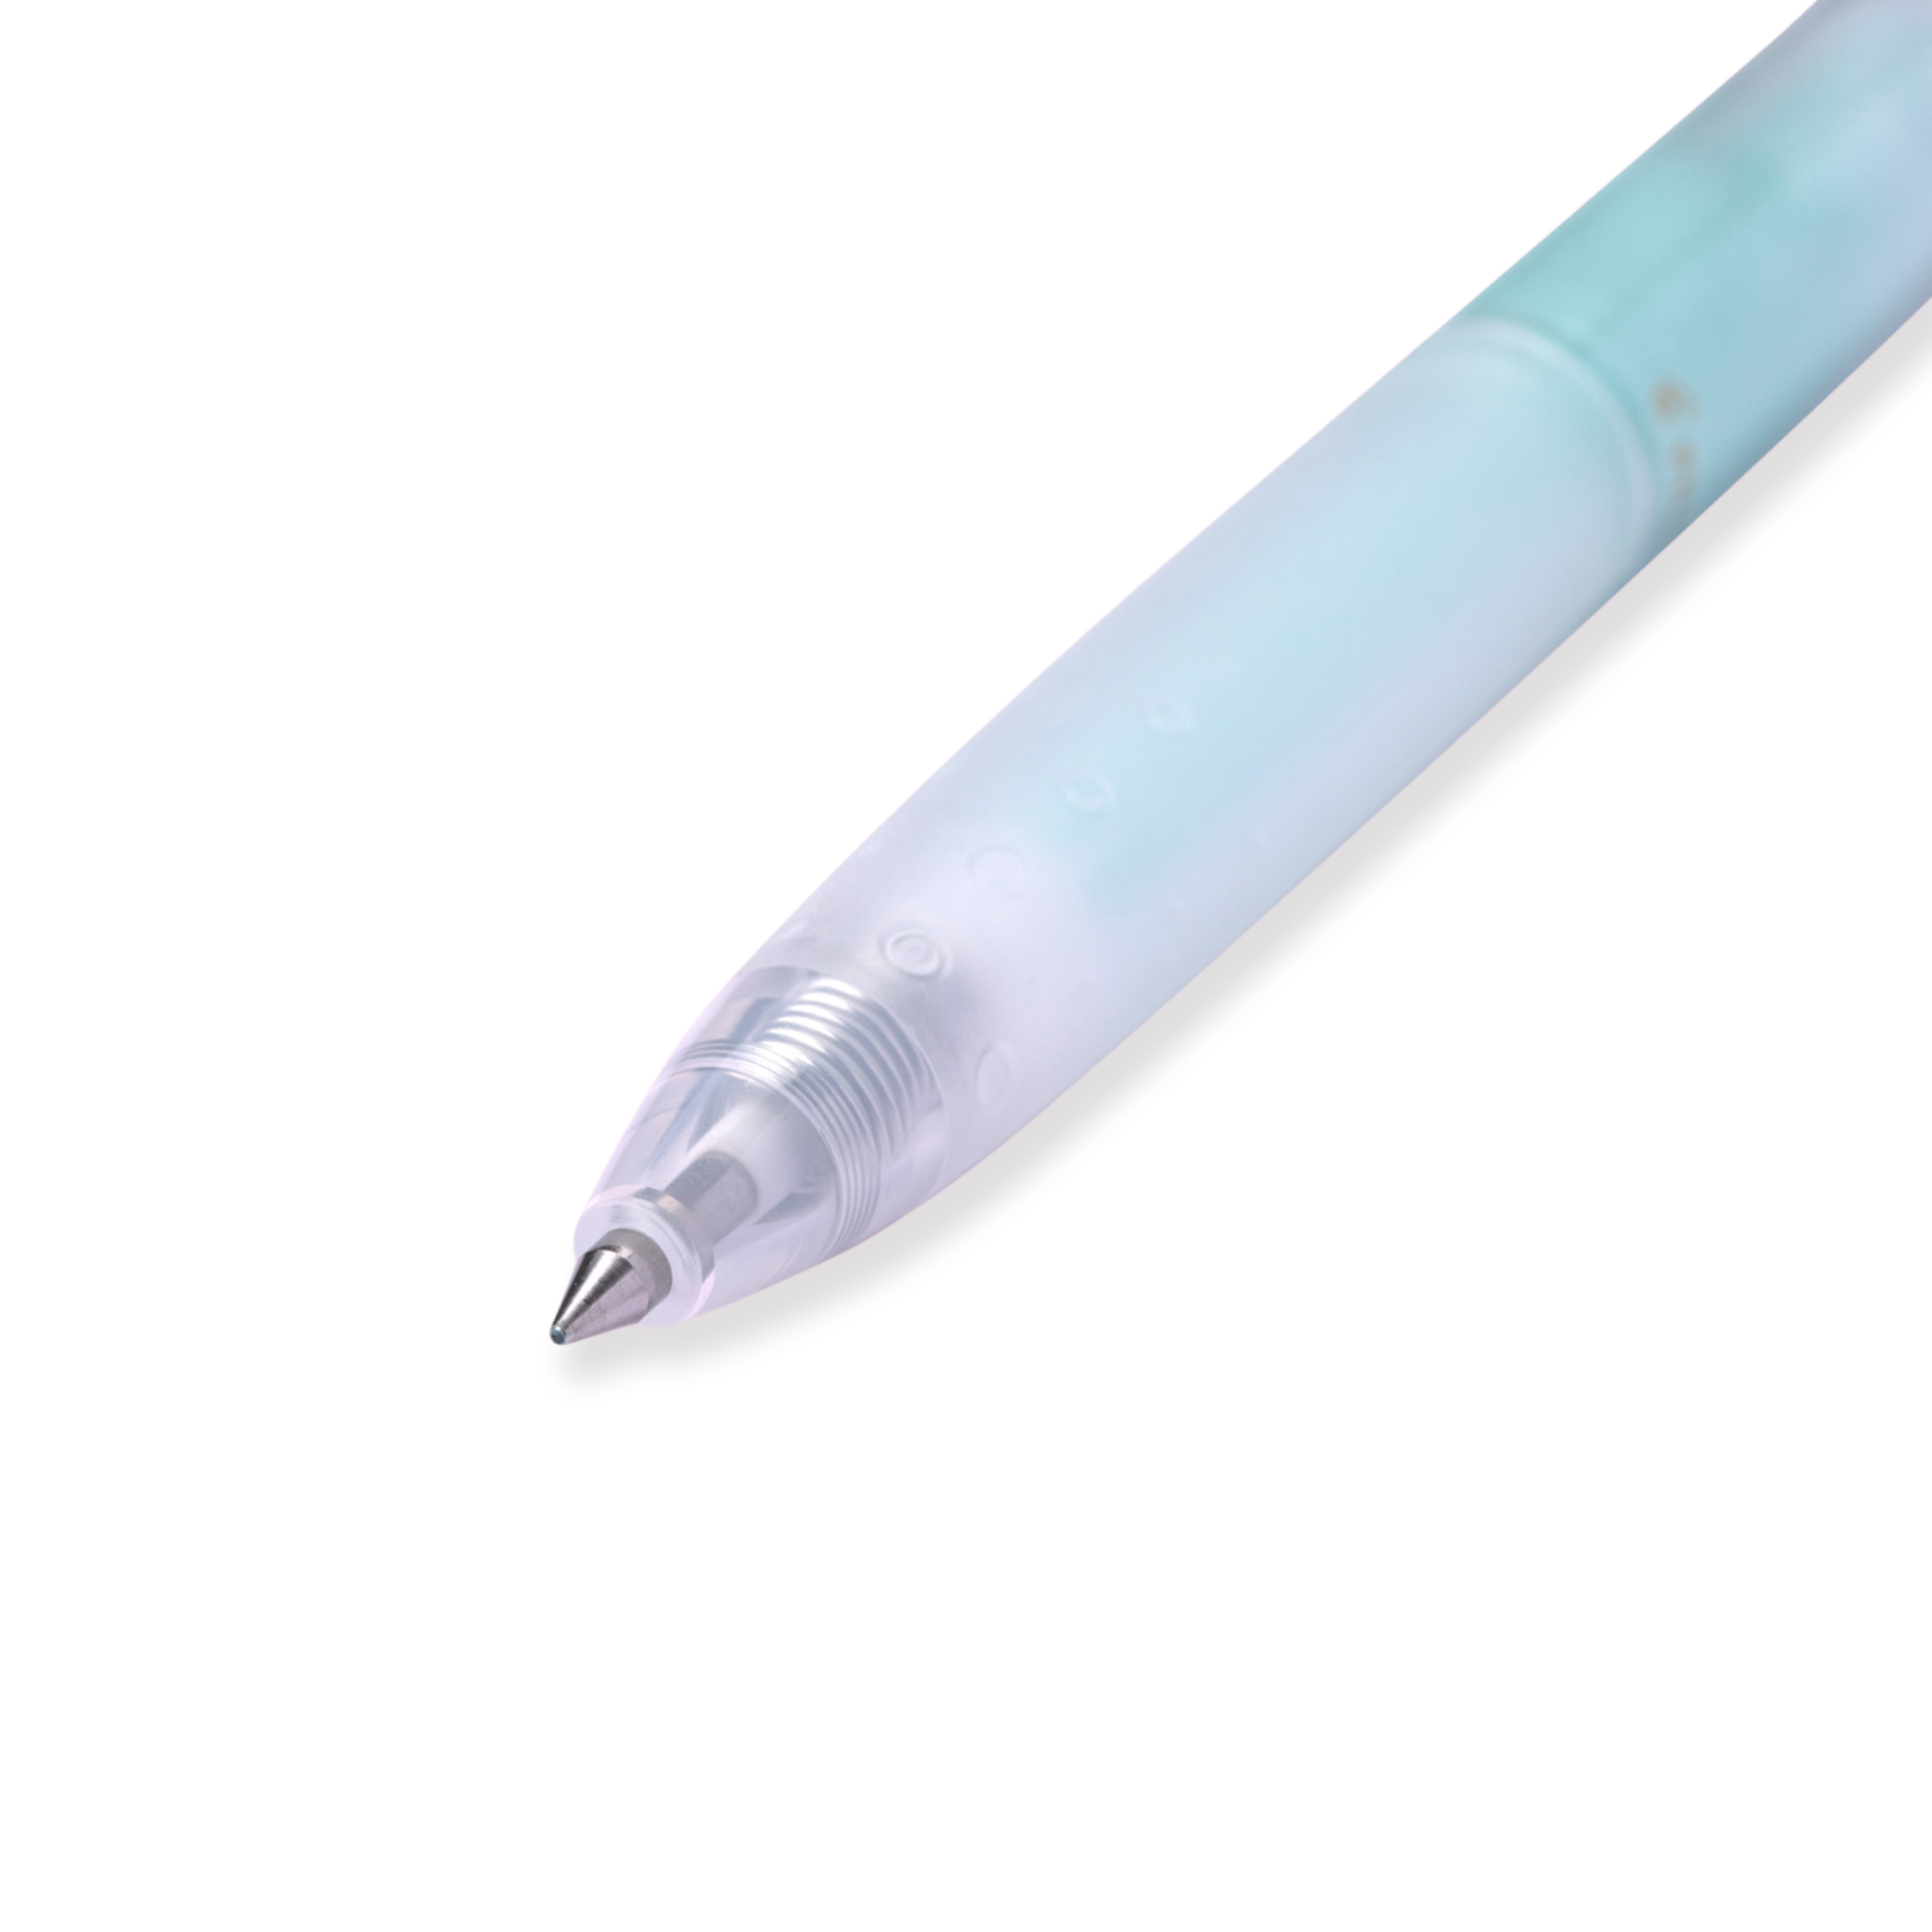 Pilot ILMILY Limited Edition Ballpoint Pen - Pale Tone Green